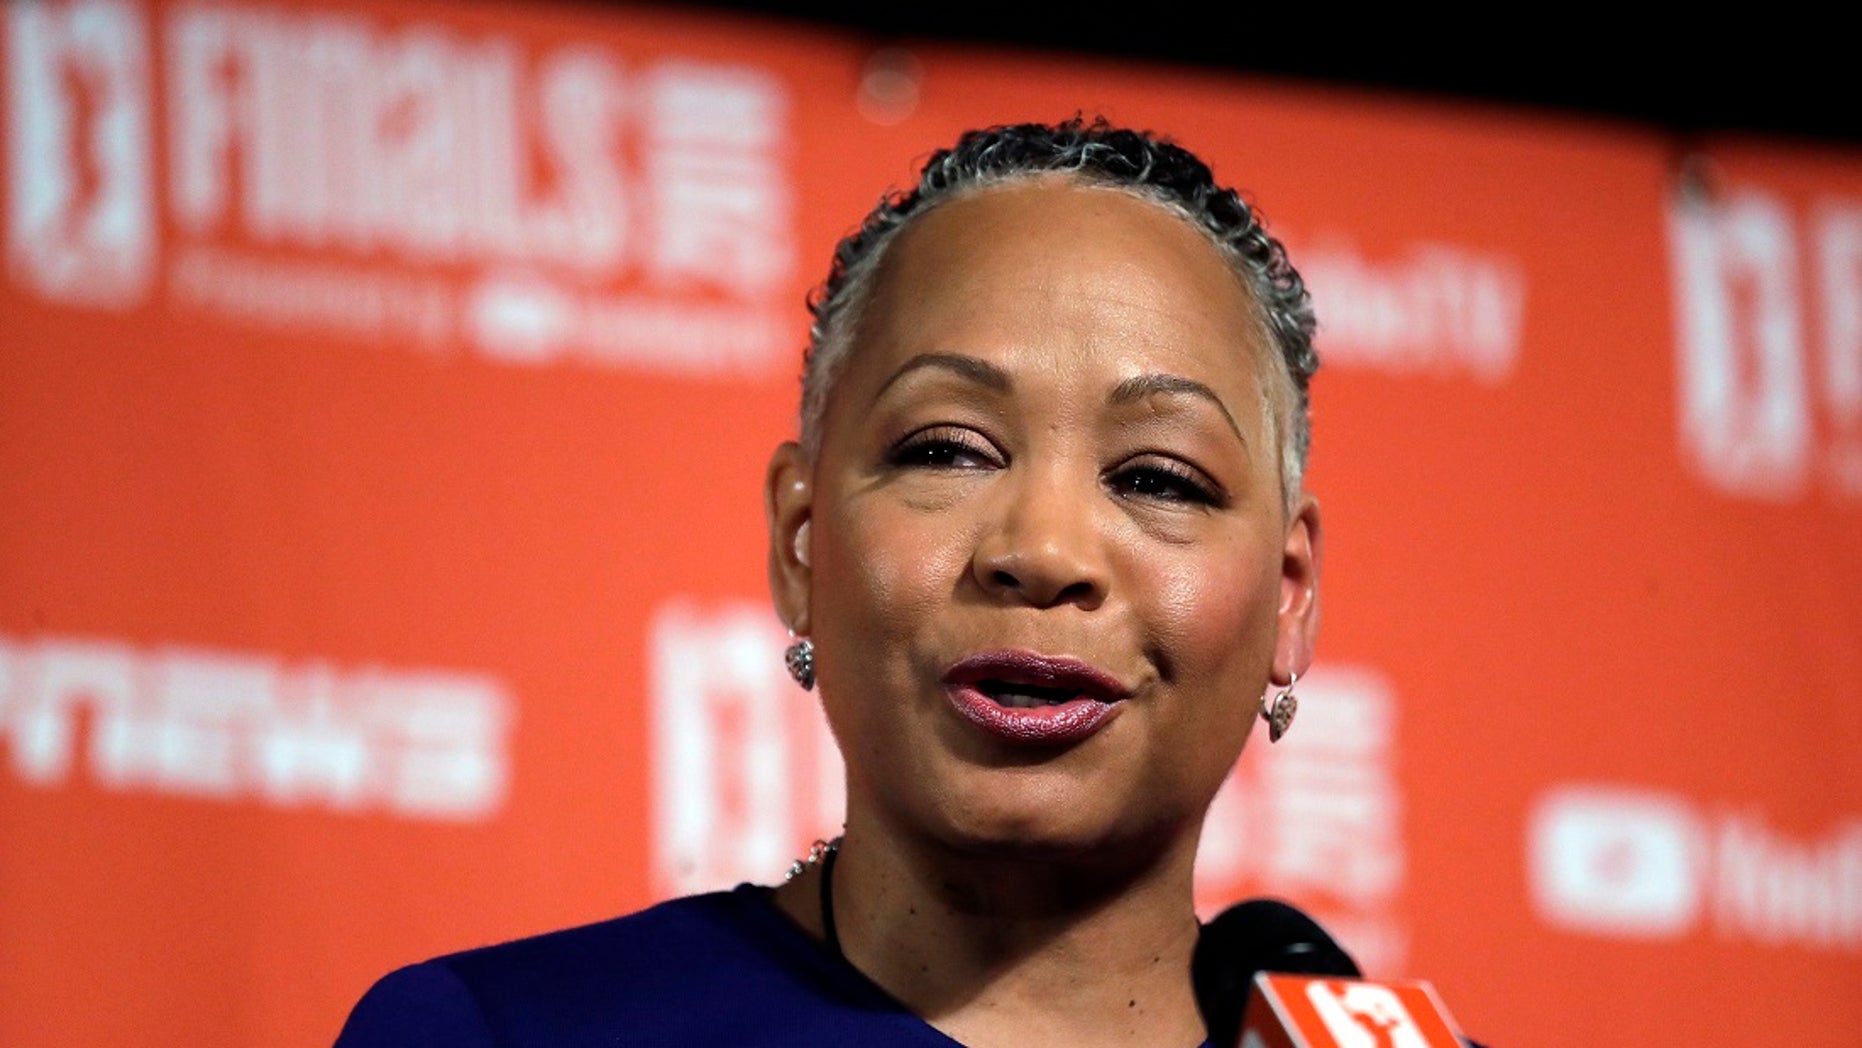 Lisa Borders resigned as President and CEO of Time & # 39; s Up, a Gender Equality Initiative founded in 2018 in response to allegations of sexual misconduct in Hollywood . (AP Photo / Elaine Thompson, File)